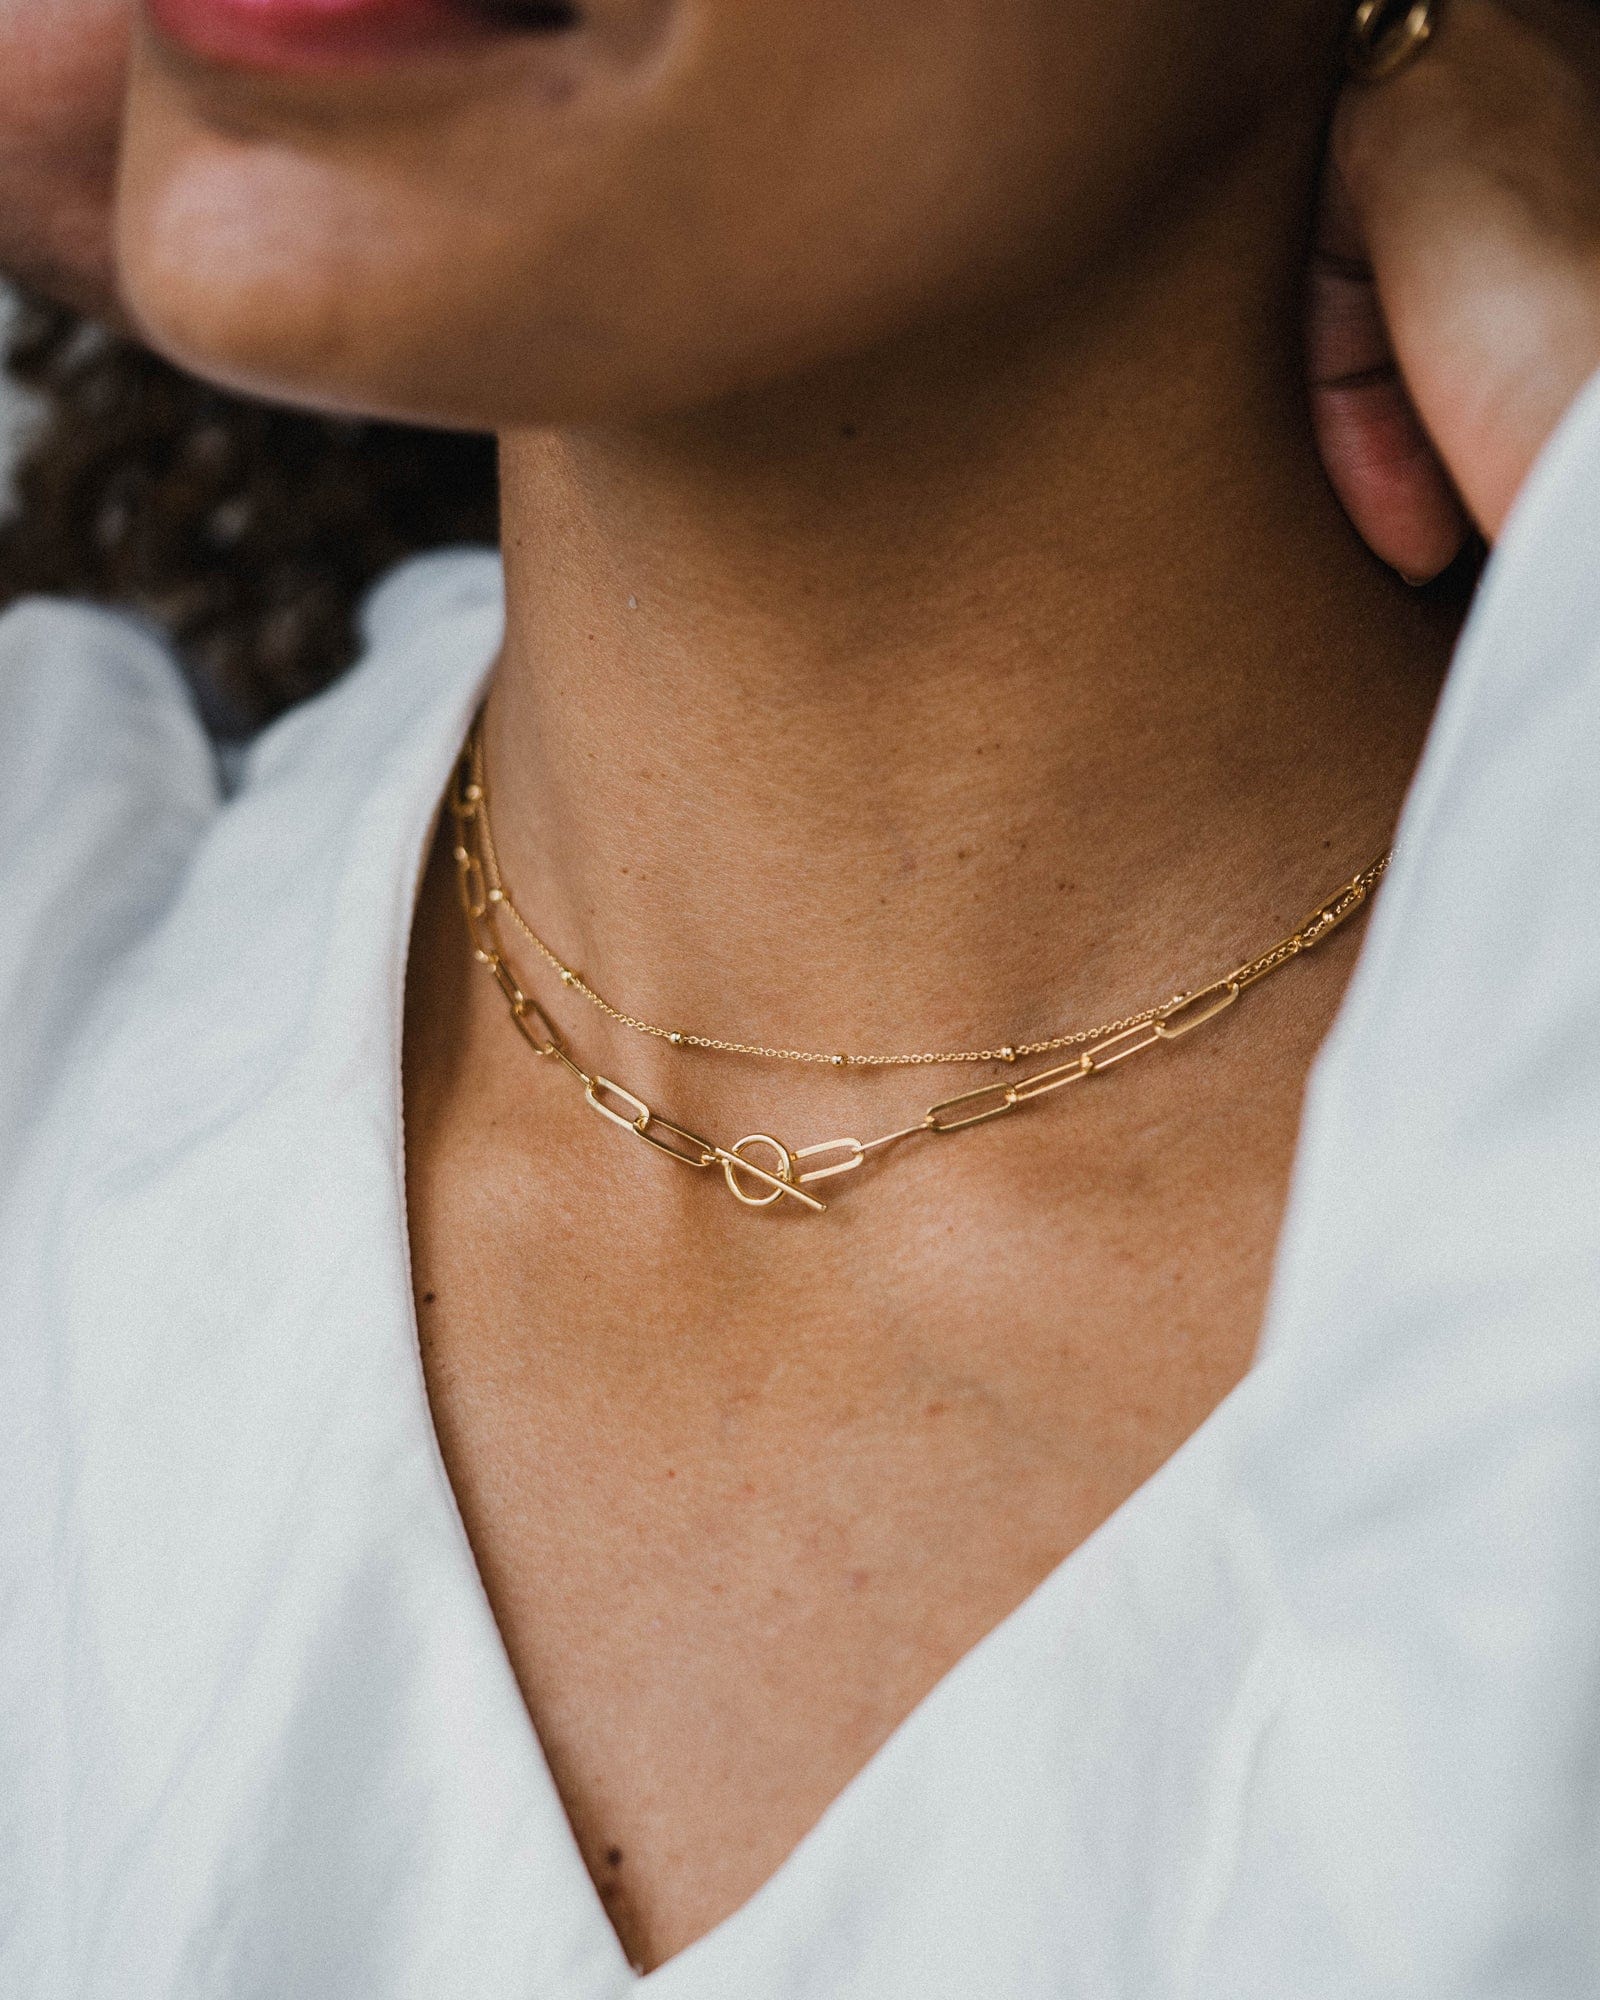 Gold Plated Medium Paperlink Necklace